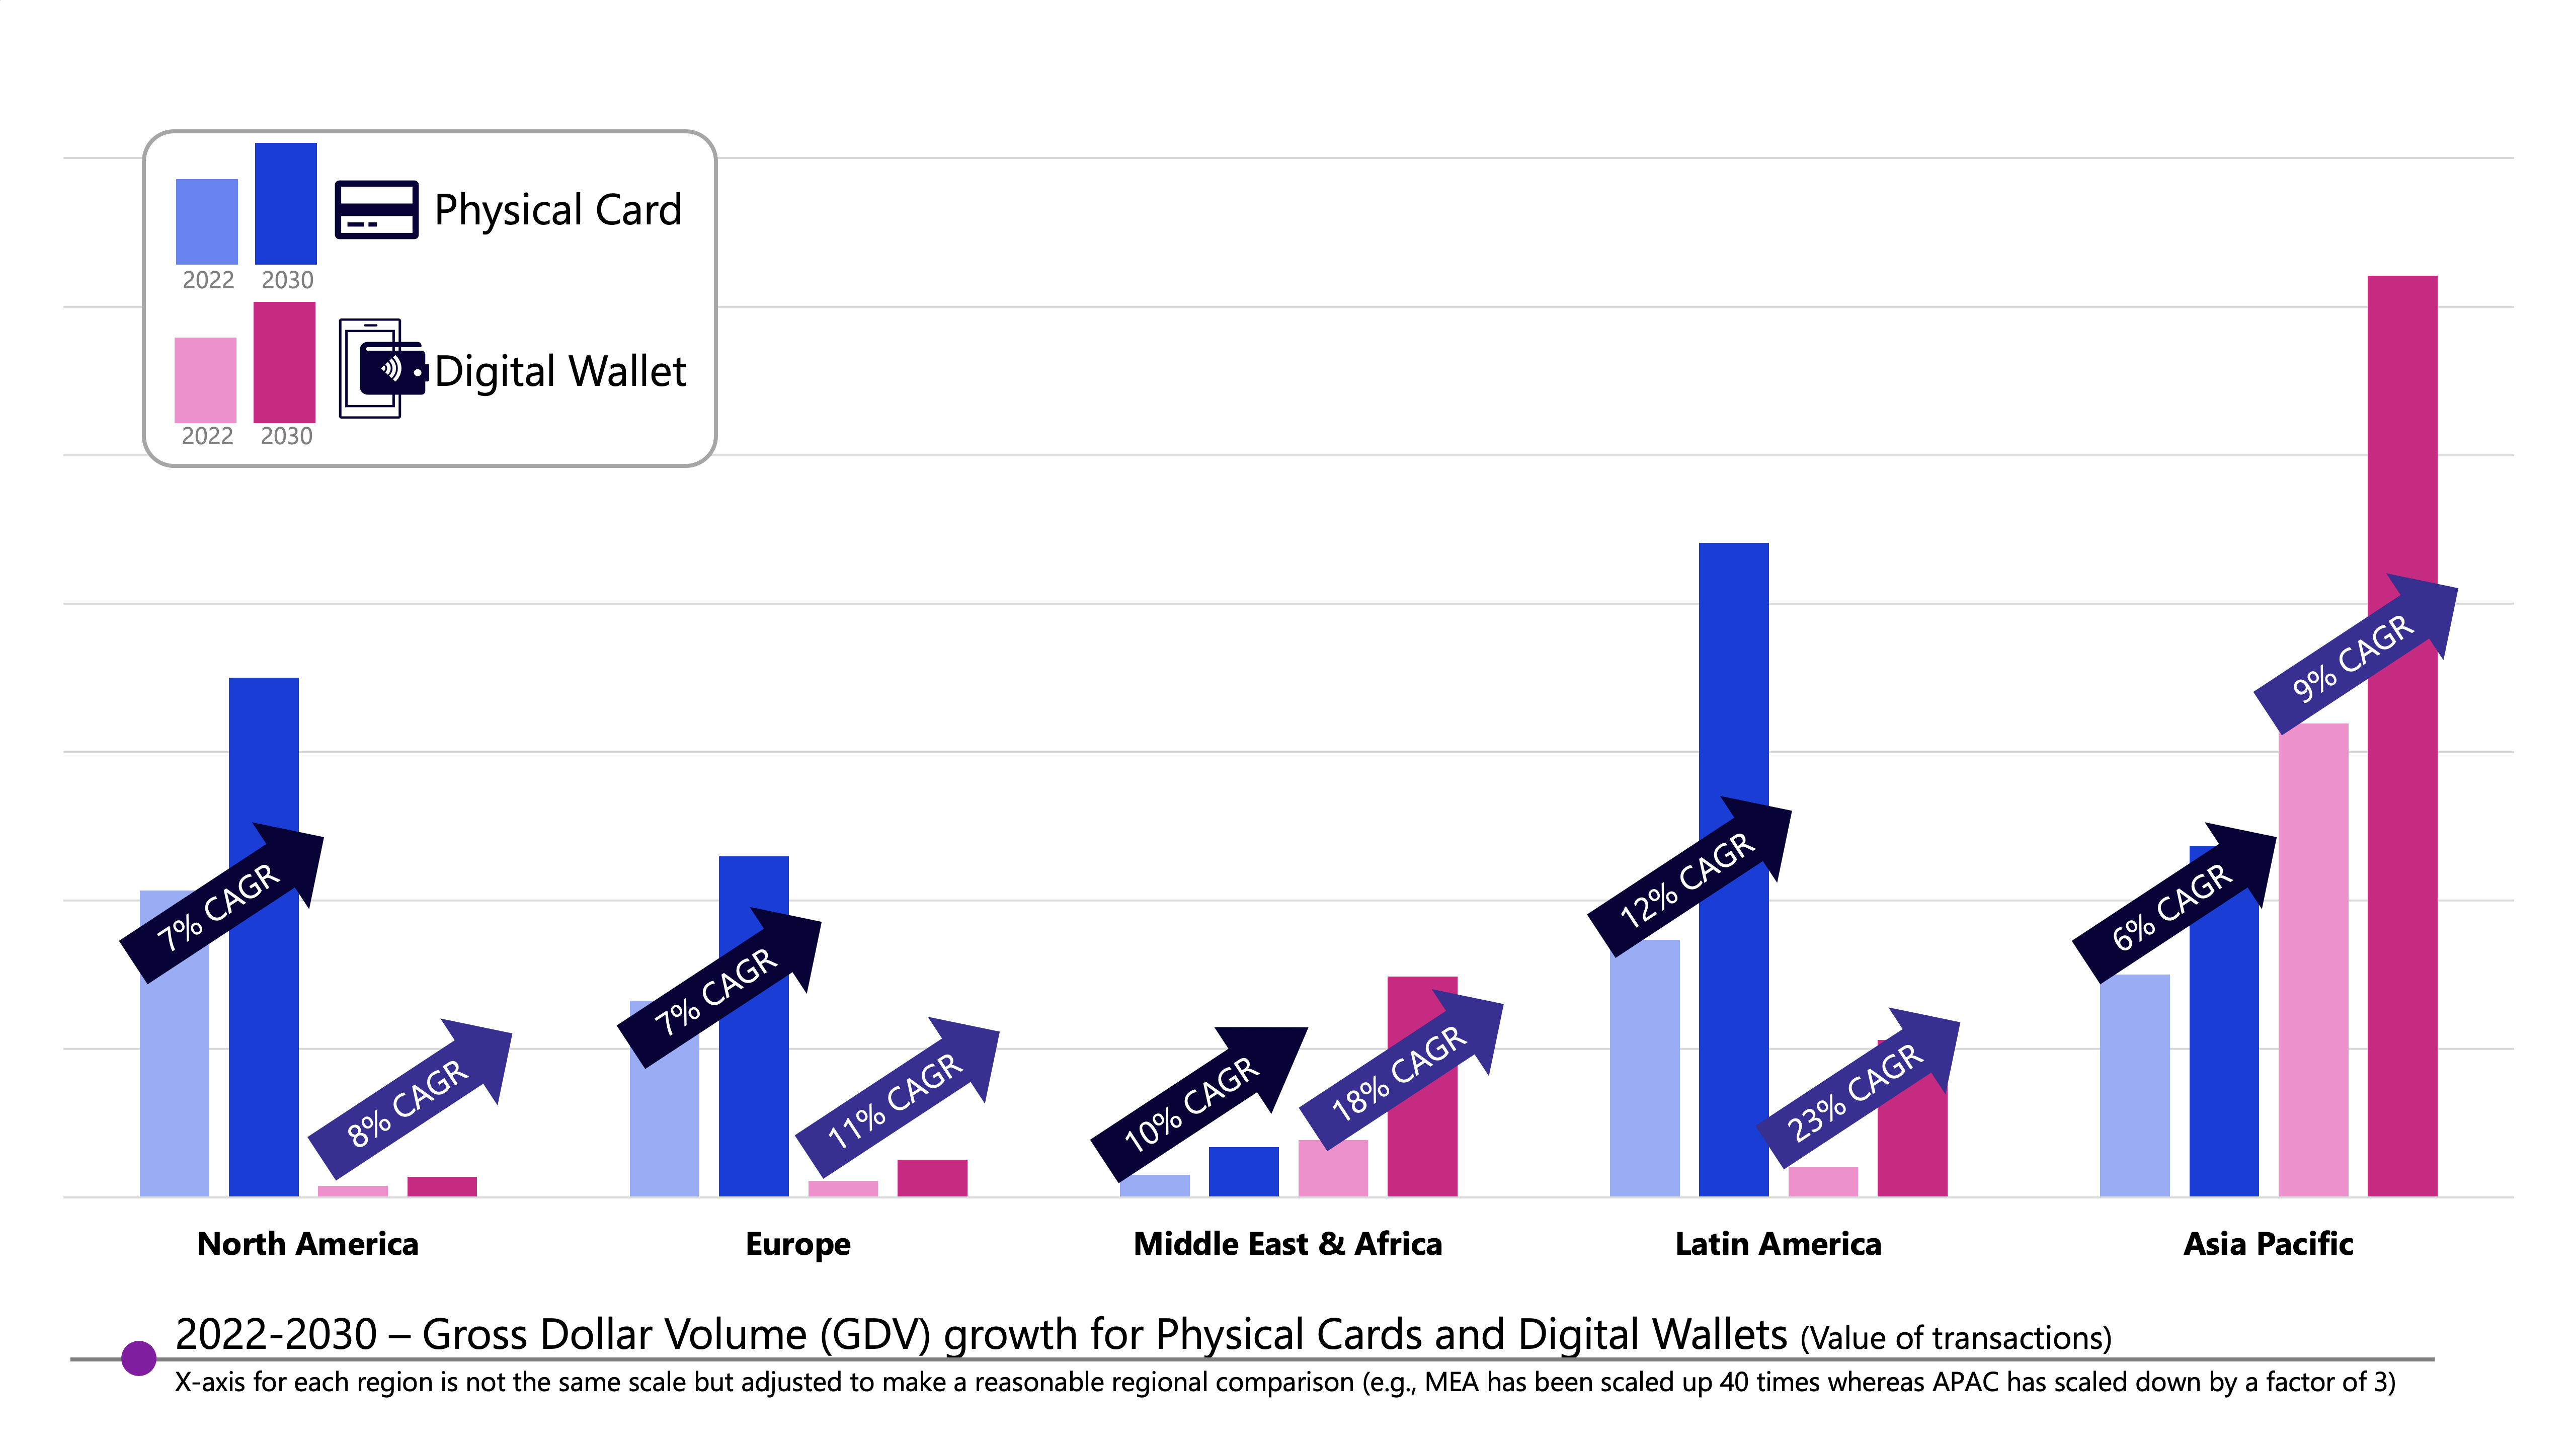 EDC Growth of digital wallets vs physical cards